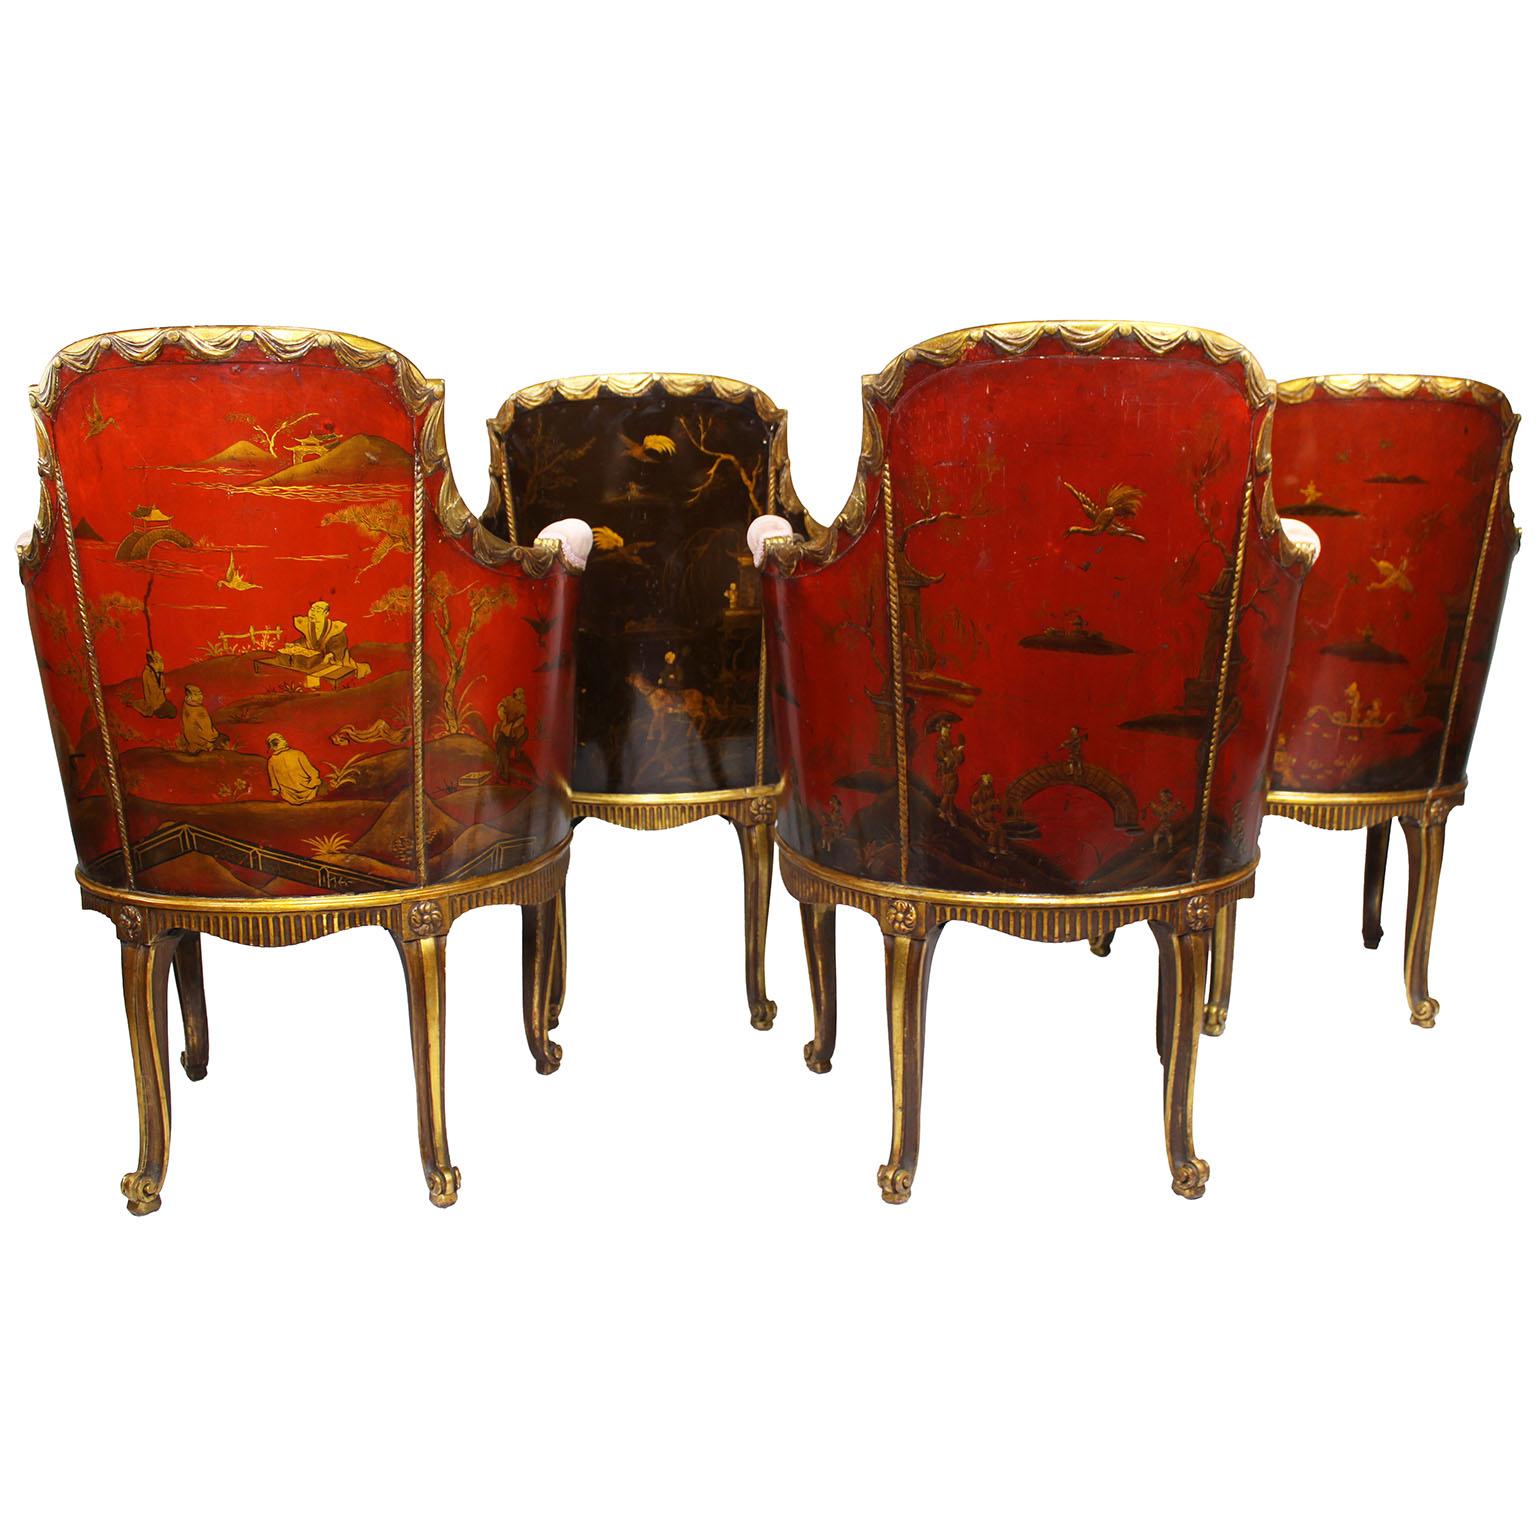 A Fine and Rare Assembled Set of Four French Louis XV Style Gilt-Wood Carved and Japanned-Chinoiserie Lacquer Decorated Bergers Armchairs, attributed to Maison Jansen (House of Jansen). The rounded barrel-shaped frames with padded backseat, interior